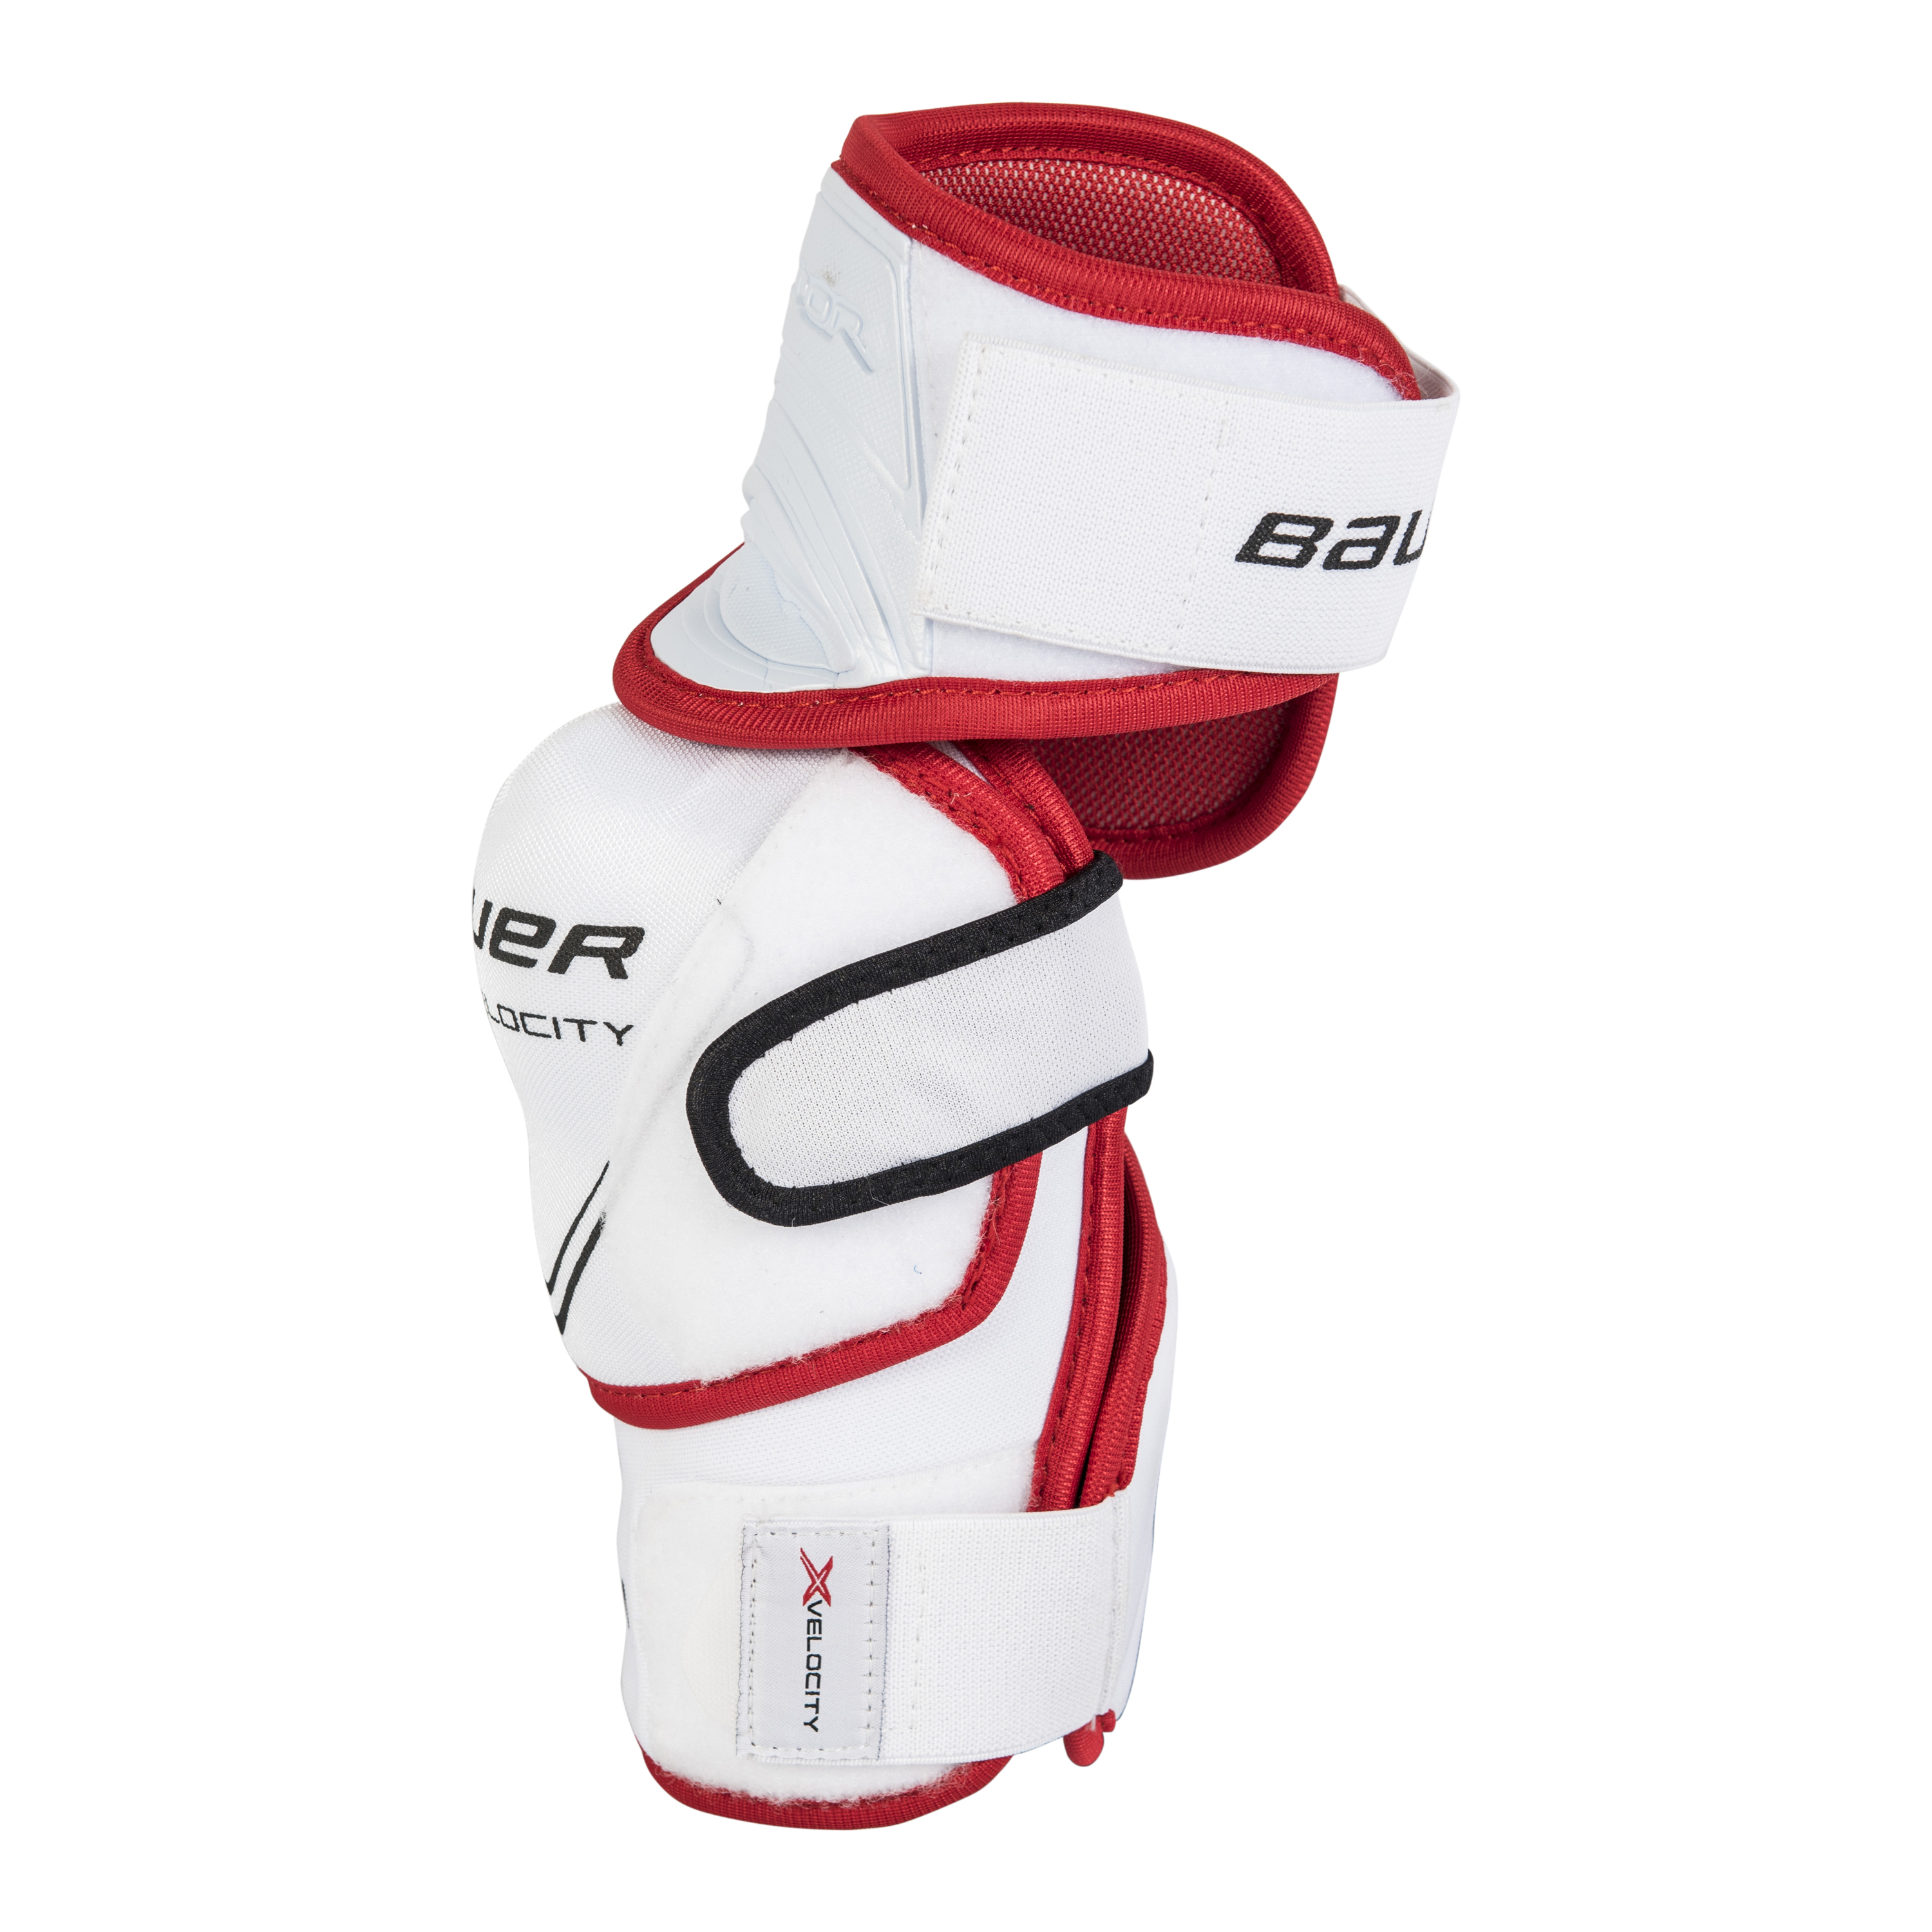 Bauer X:Velocity Protective Gear